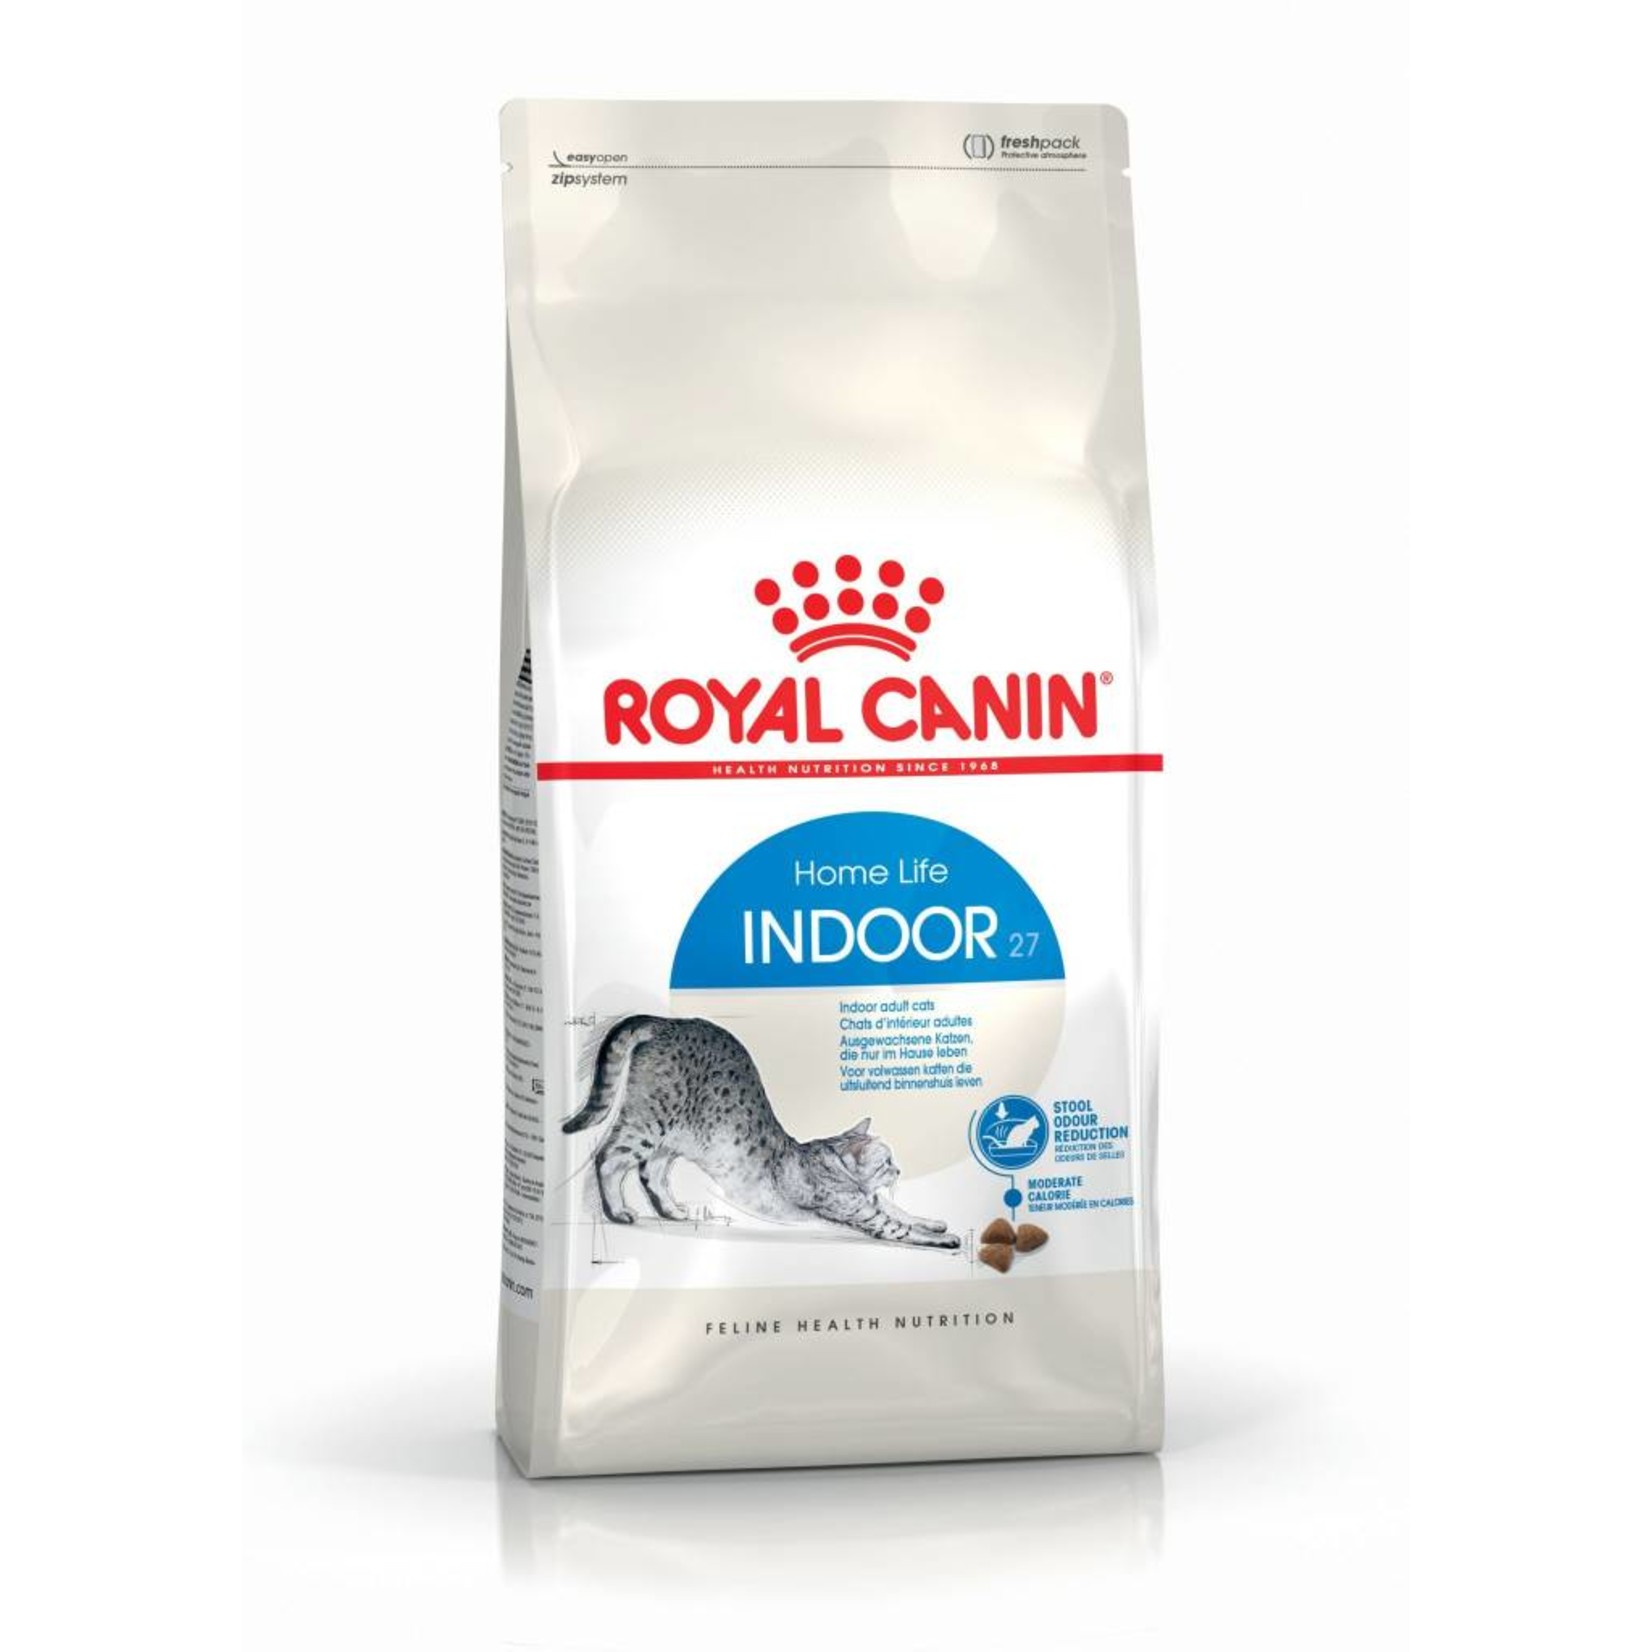 Royal Canin Indoor 27 Adult Cat Dry Food